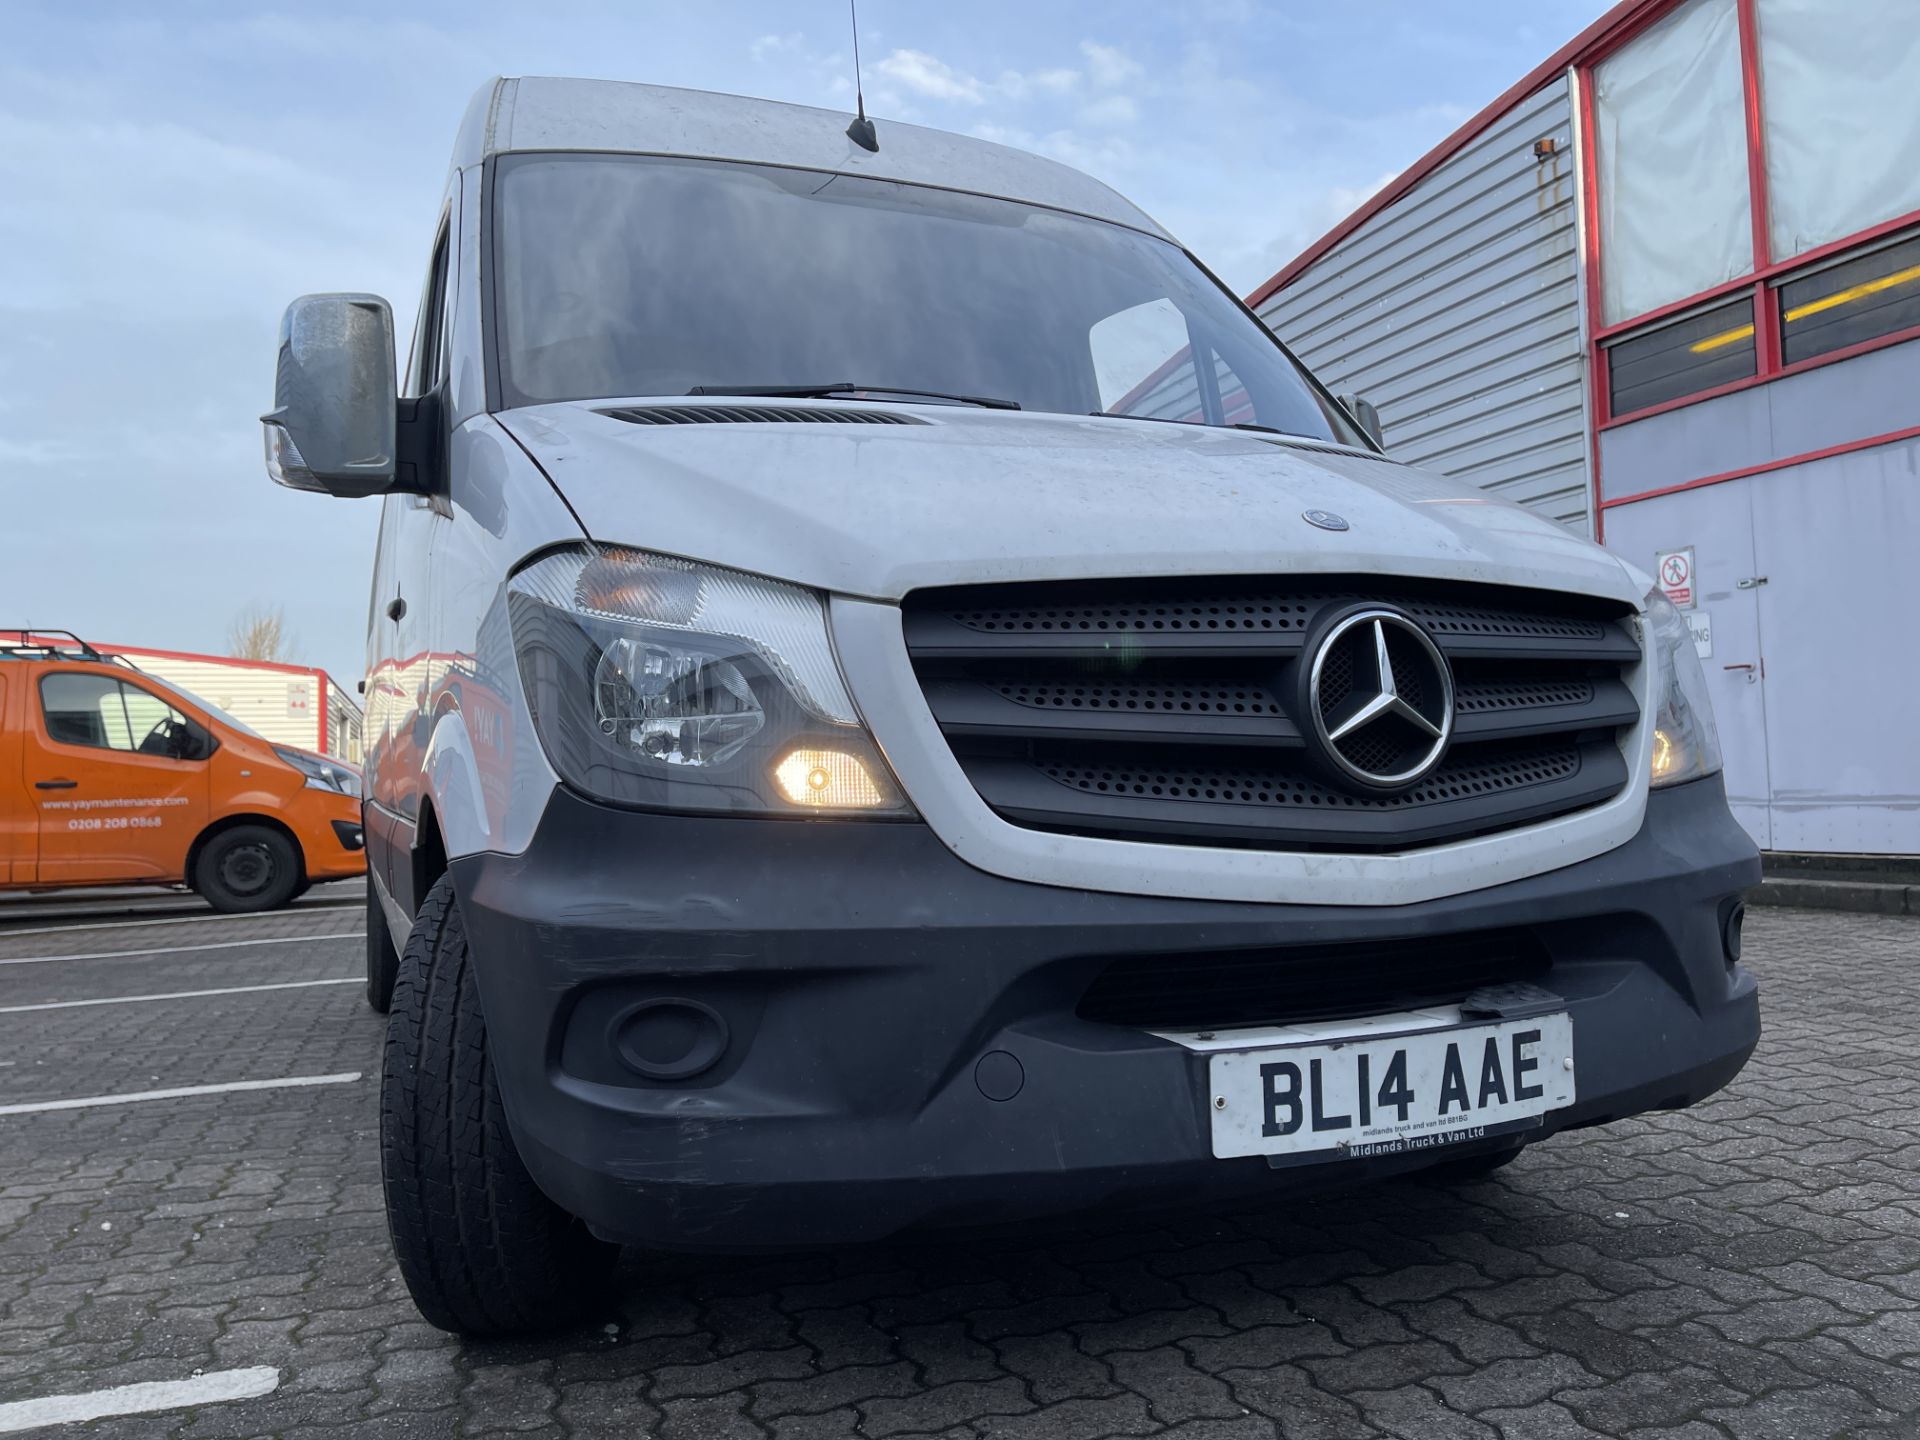 2014 - Mercedes Sprinter MWB - Facelift Model - Low Miles for Age - Image 13 of 39